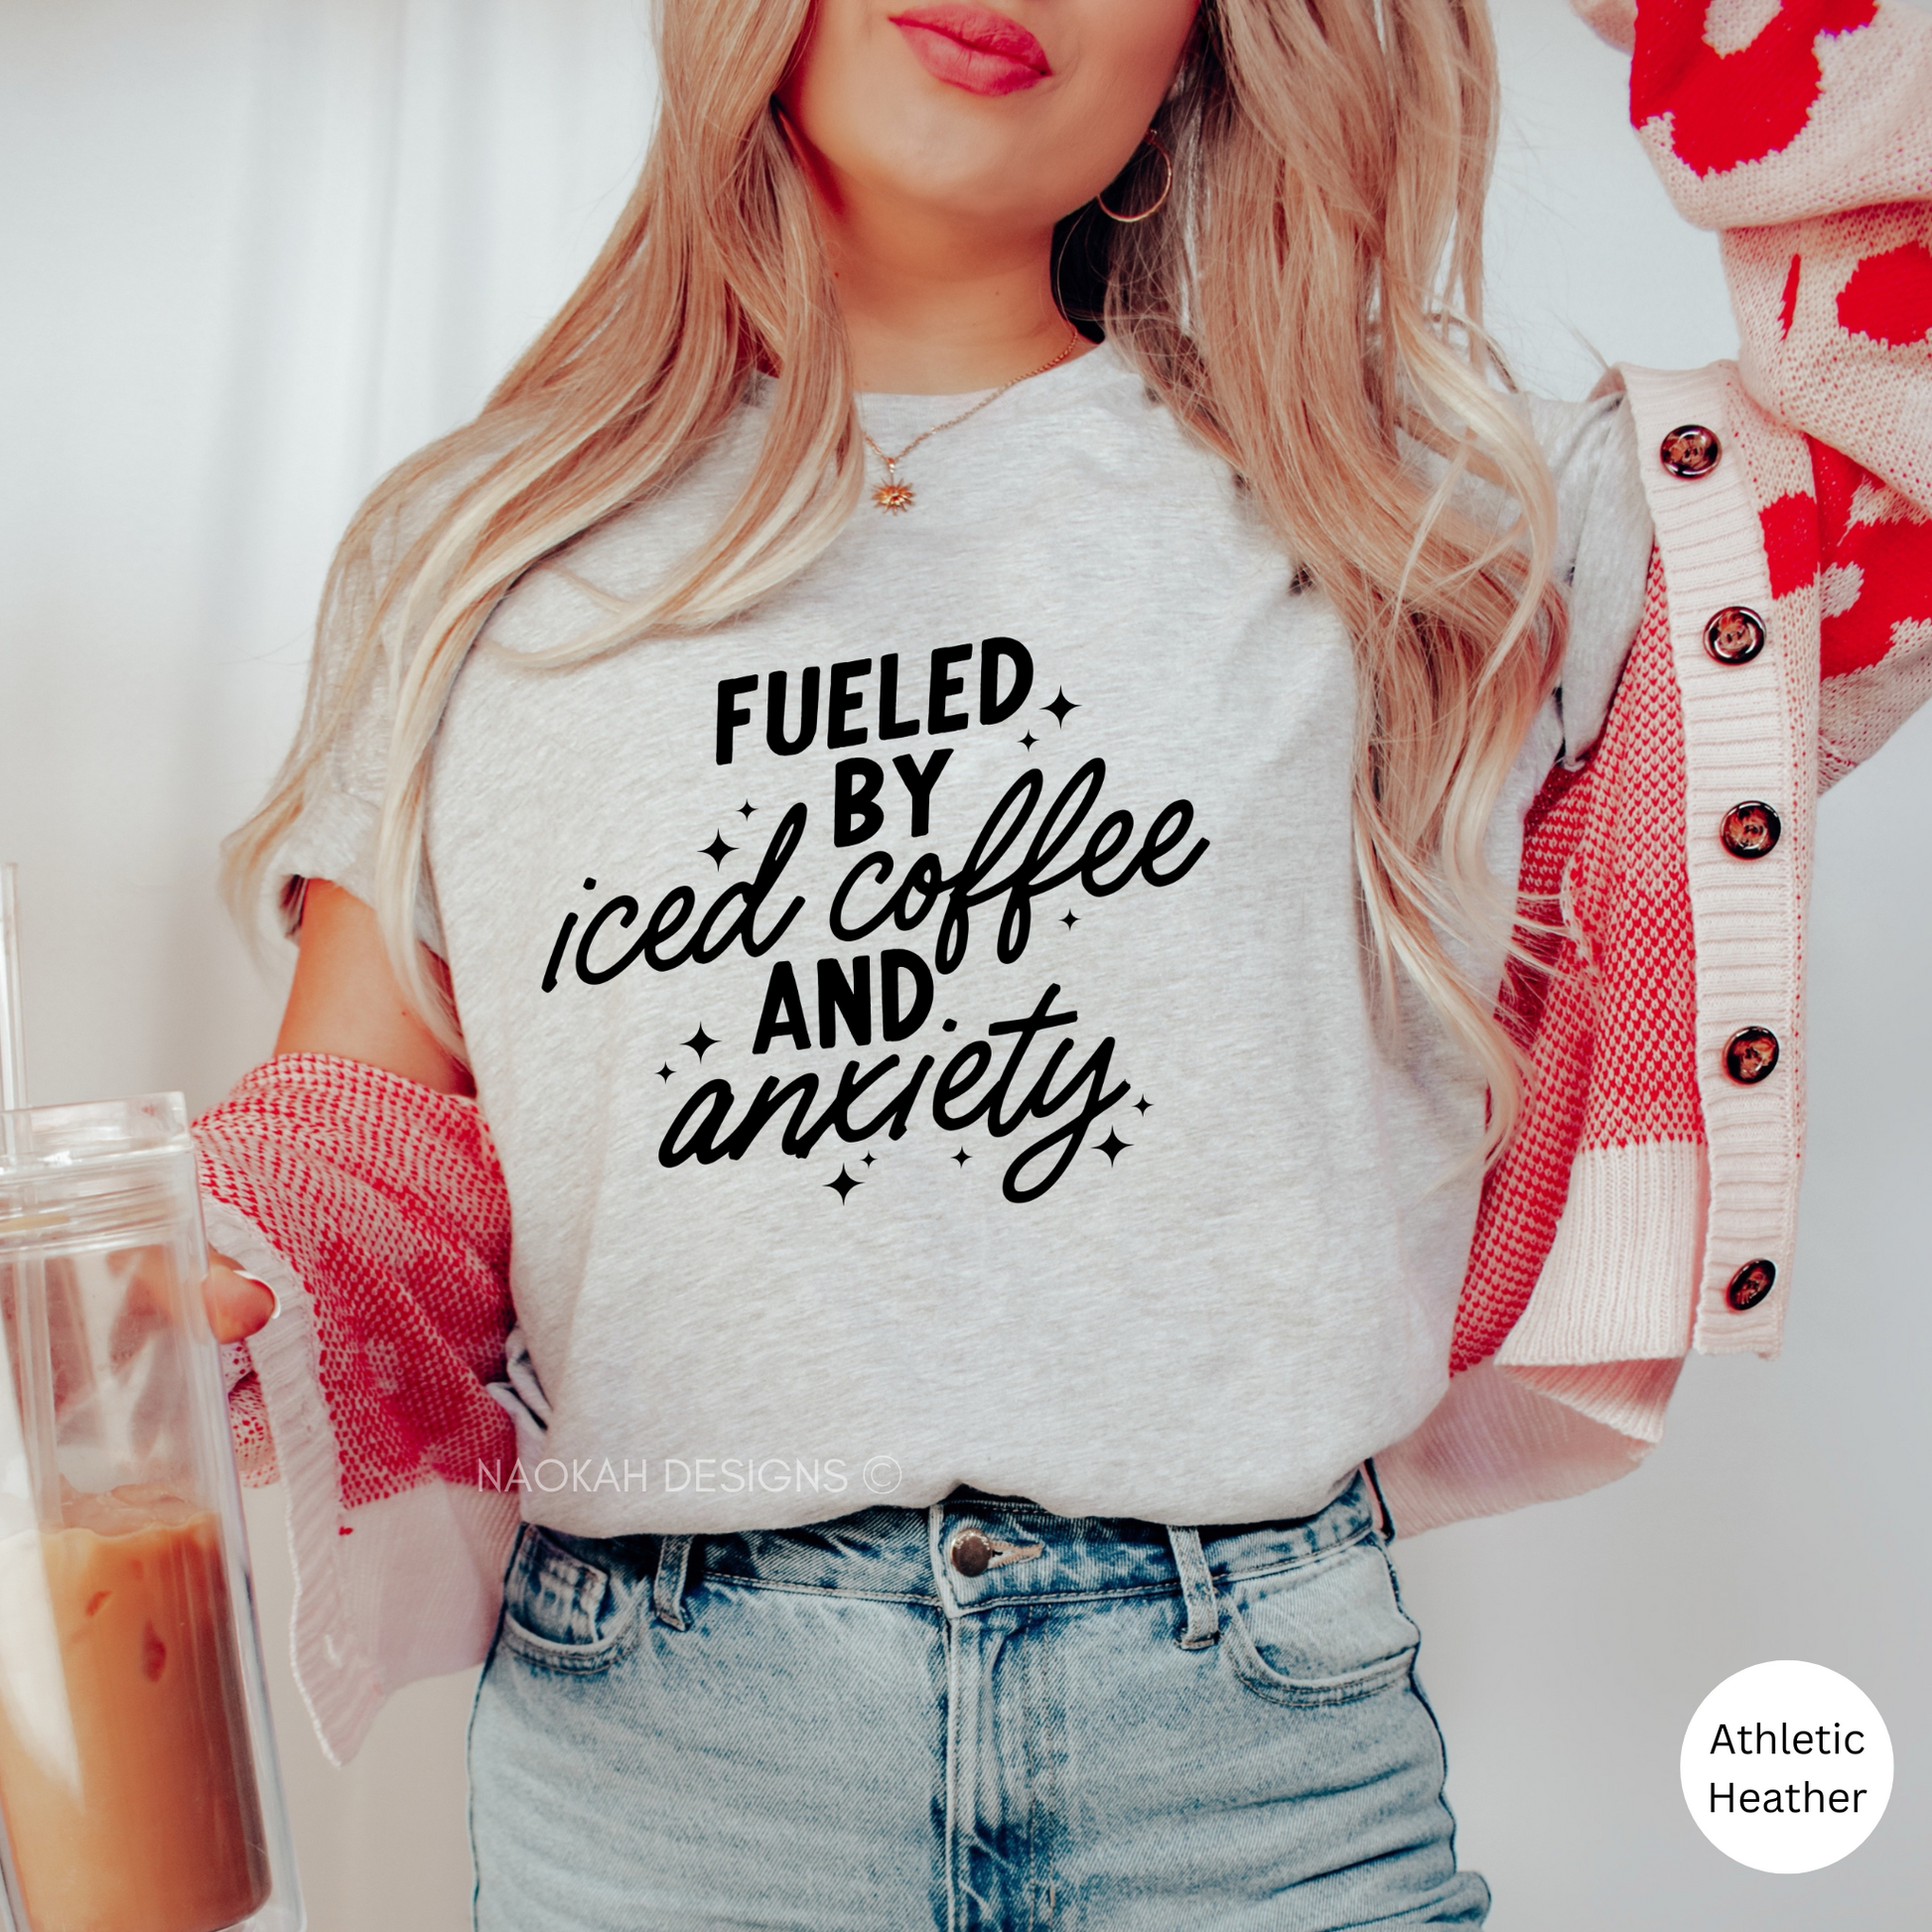 Fueled By Iced Coffee and Anxiety Shirt, Iced Coffee Addict Shirt, Mental Health Shirt, Anxiety Shirt, Overstimulated Moms Club Shirt